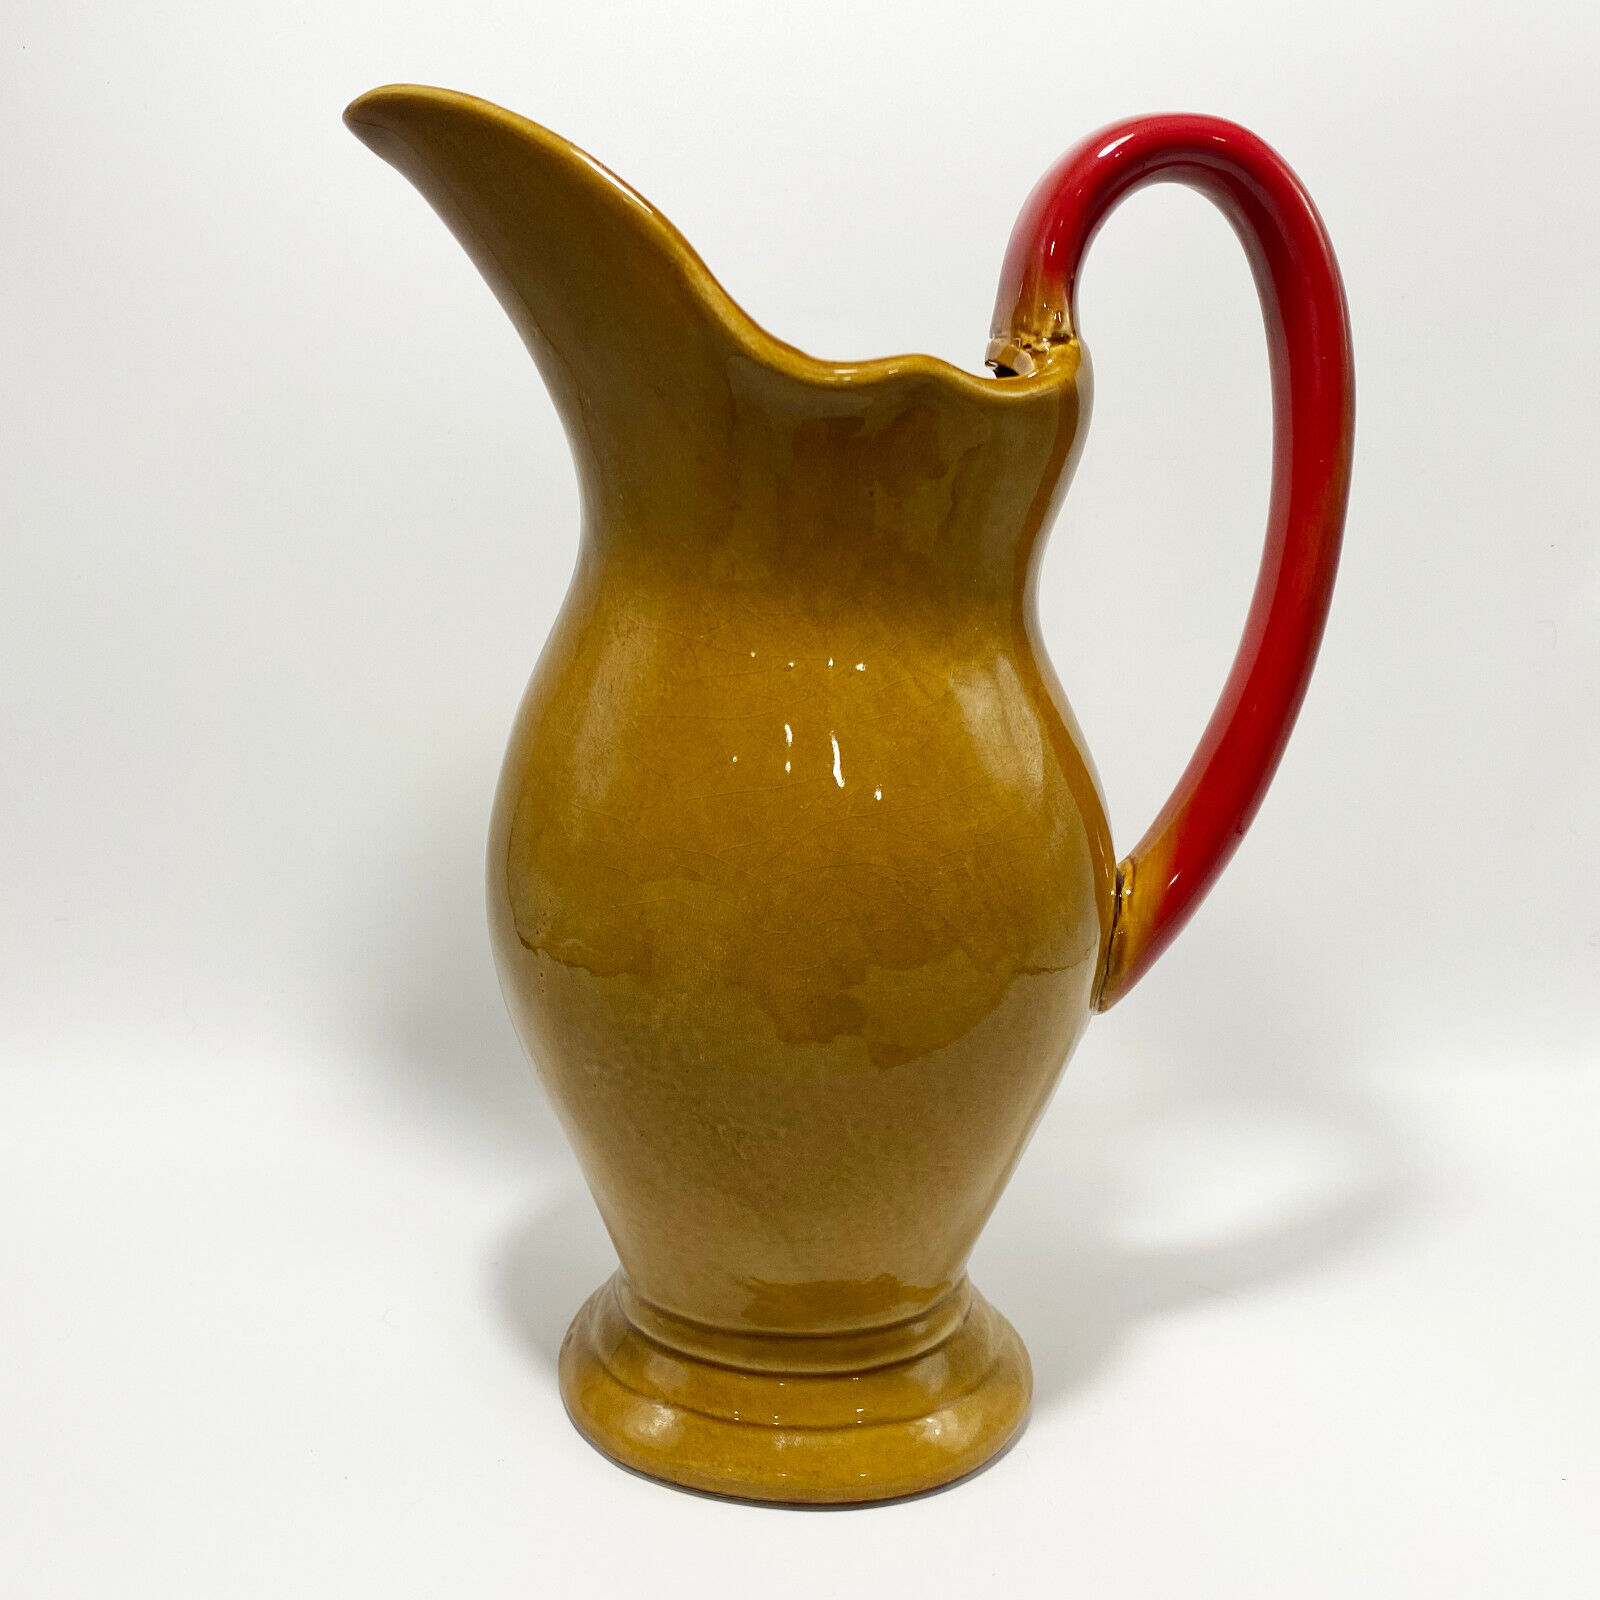 BURTON Tall Pitcher in Golden Yellow Finish with Red Handle - b+B Marking